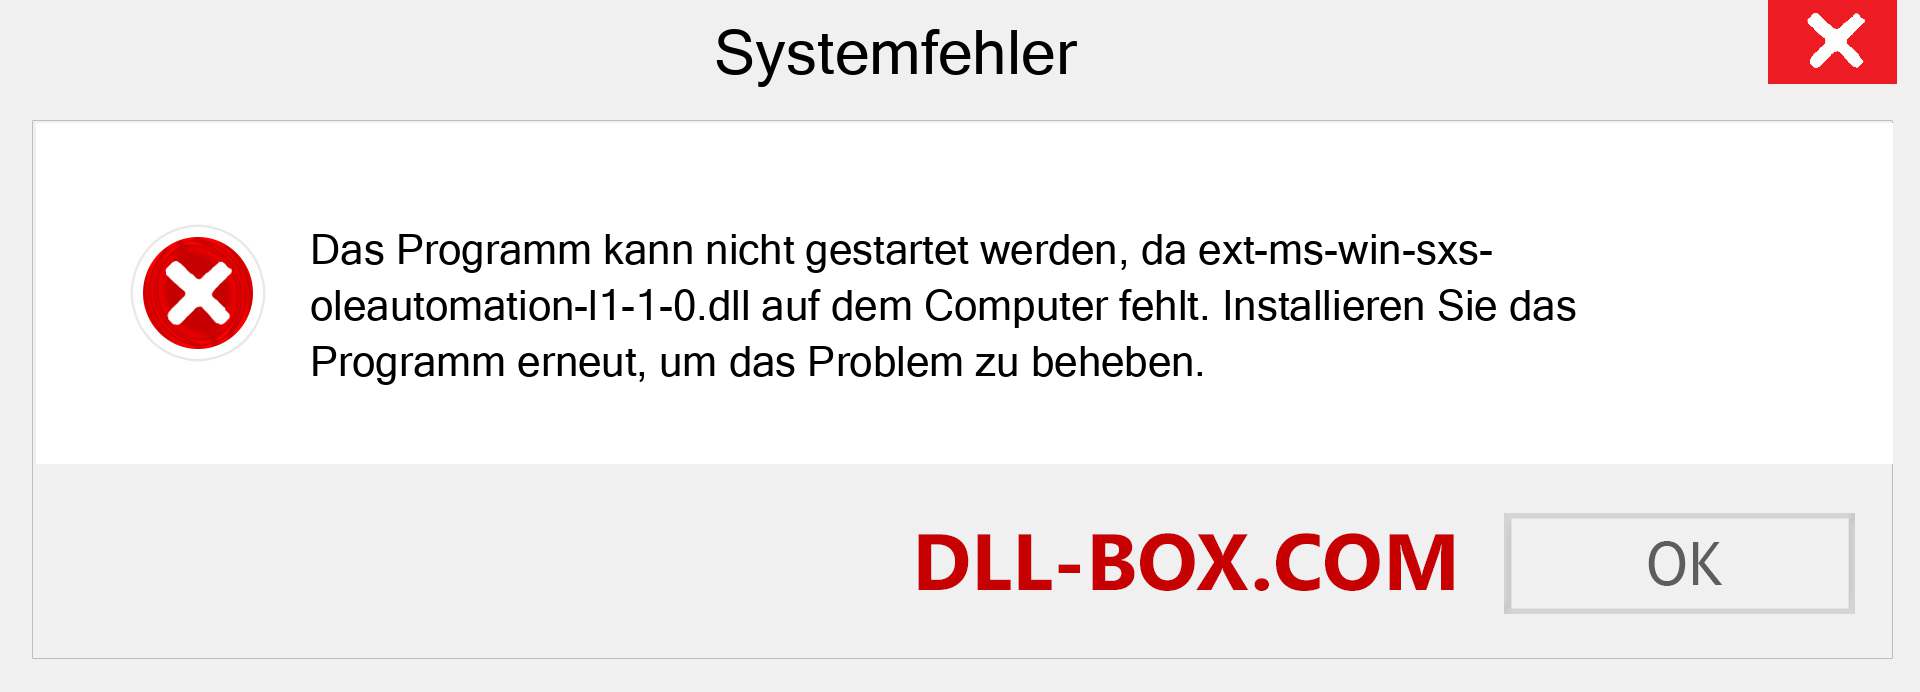 ext-ms-win-sxs-oleautomation-l1-1-0.dll-Datei fehlt?. Download für Windows 7, 8, 10 - Fix ext-ms-win-sxs-oleautomation-l1-1-0 dll Missing Error unter Windows, Fotos, Bildern